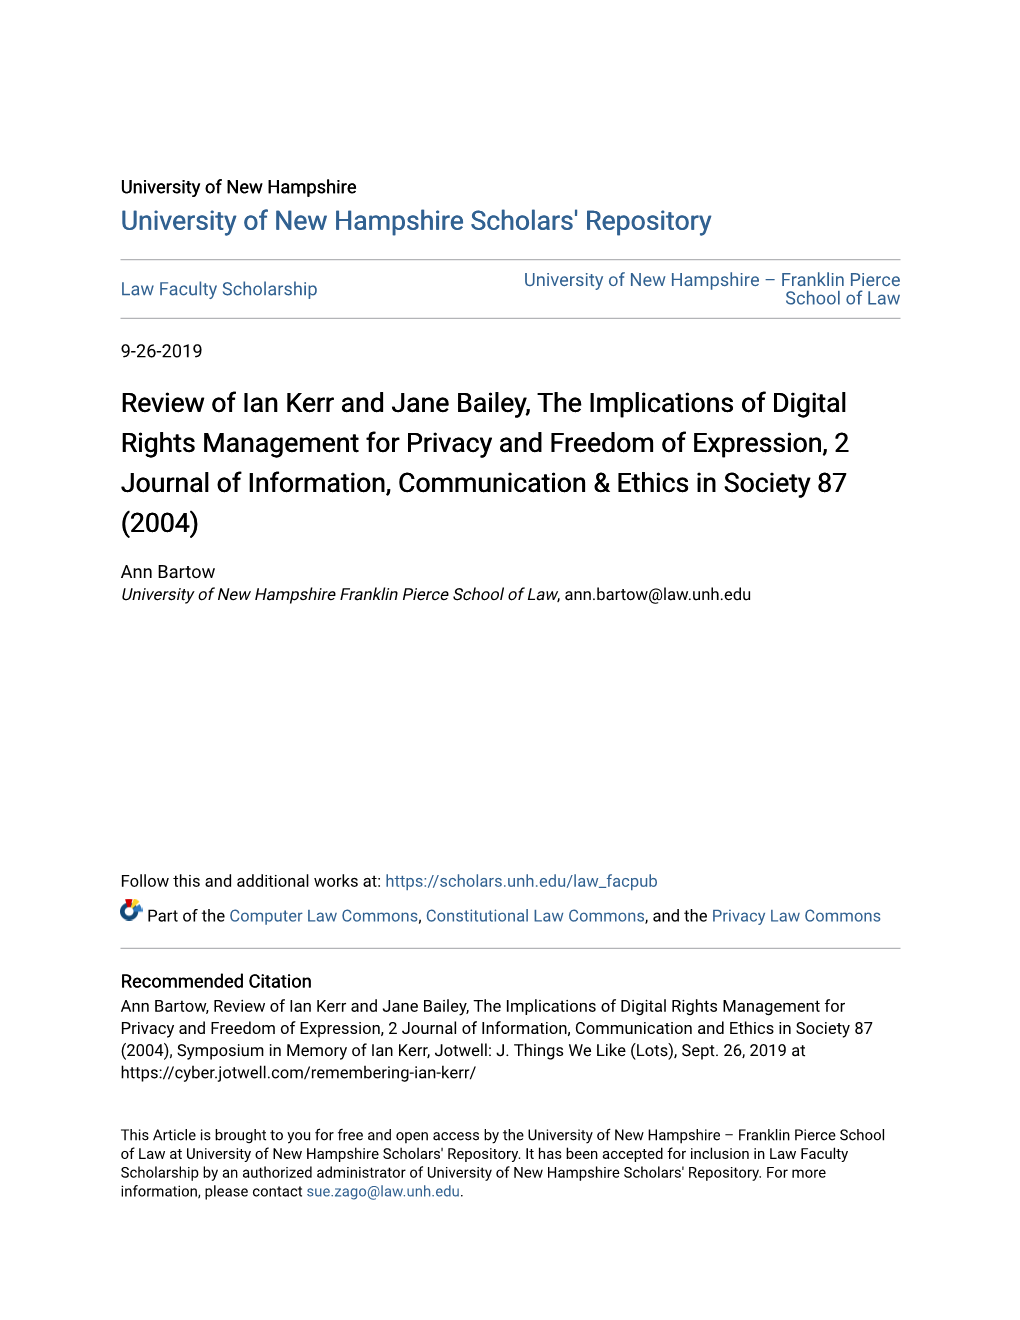 Review of Ian Kerr and Jane Bailey, the Implications of Digital Rights